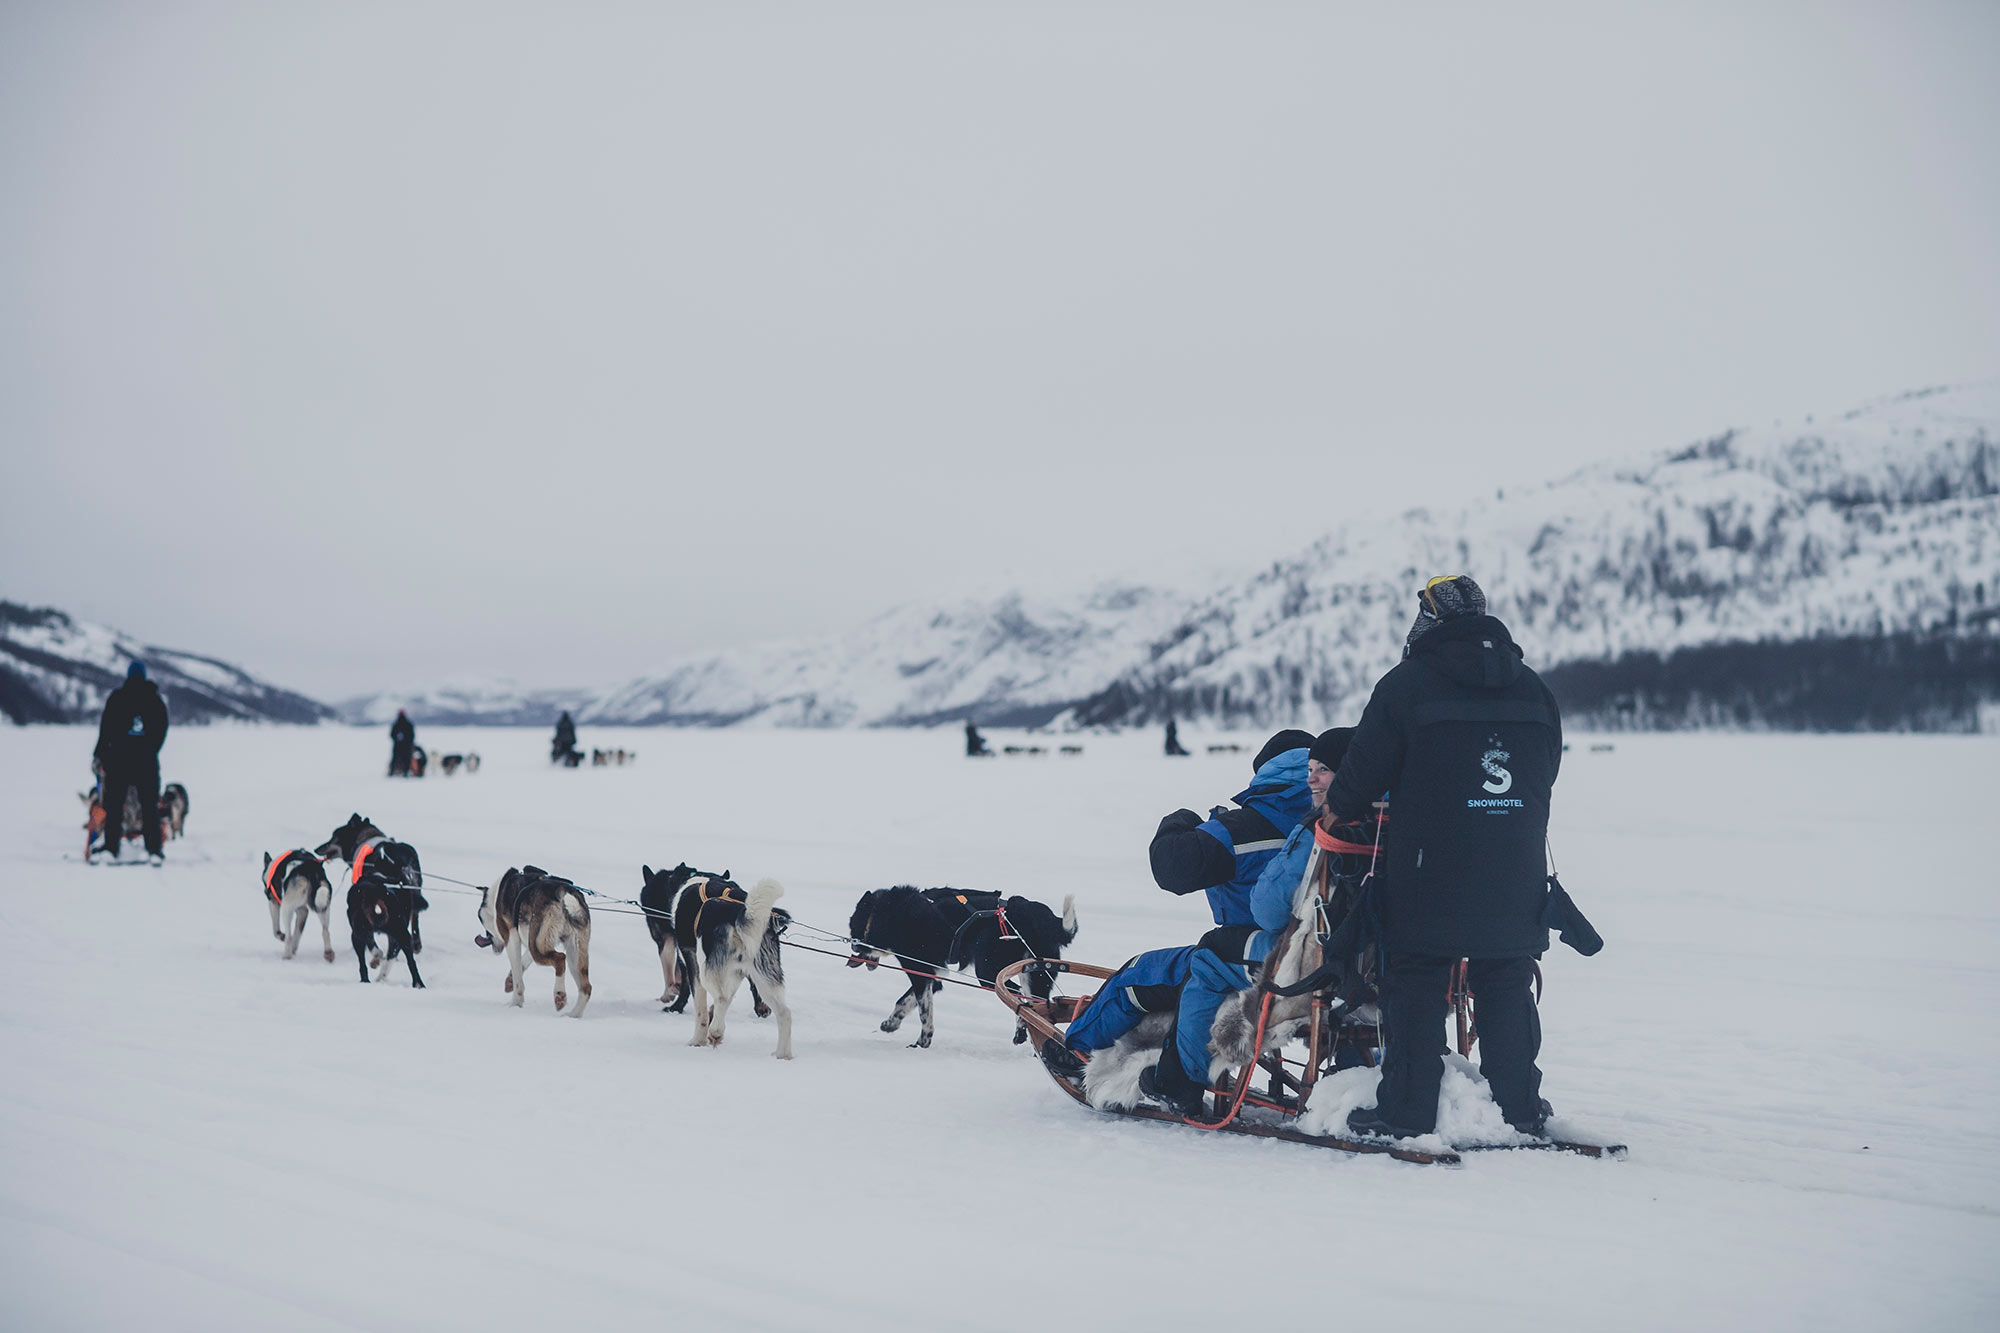 Sled dogs pulling their team through the winter landscape